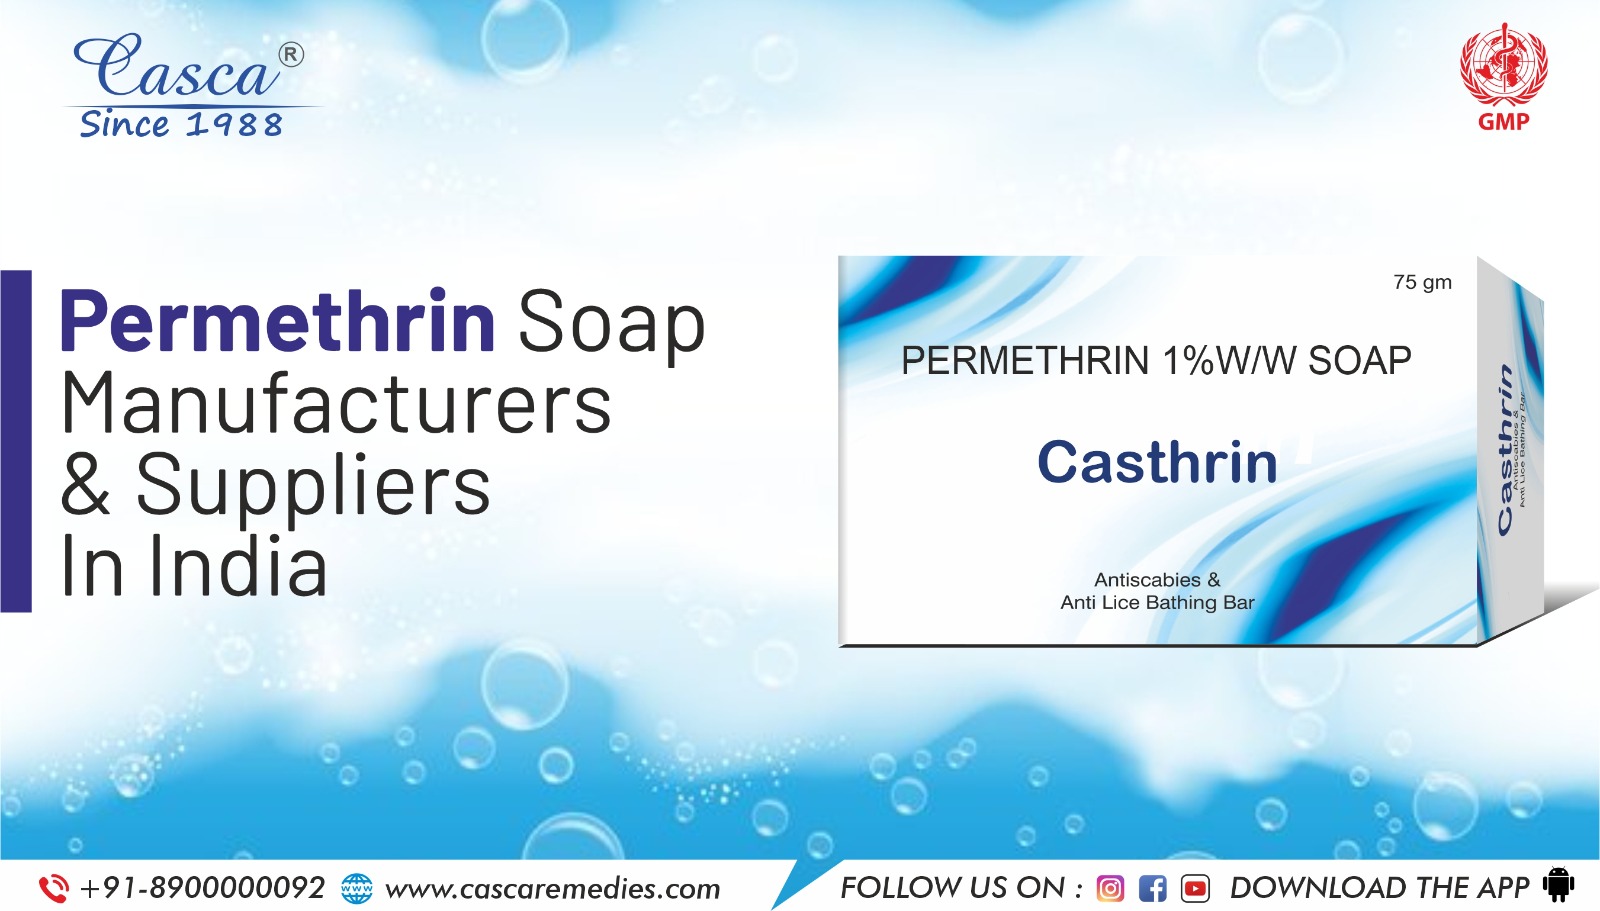 Permethrin soap manufacturers and suppliers in India